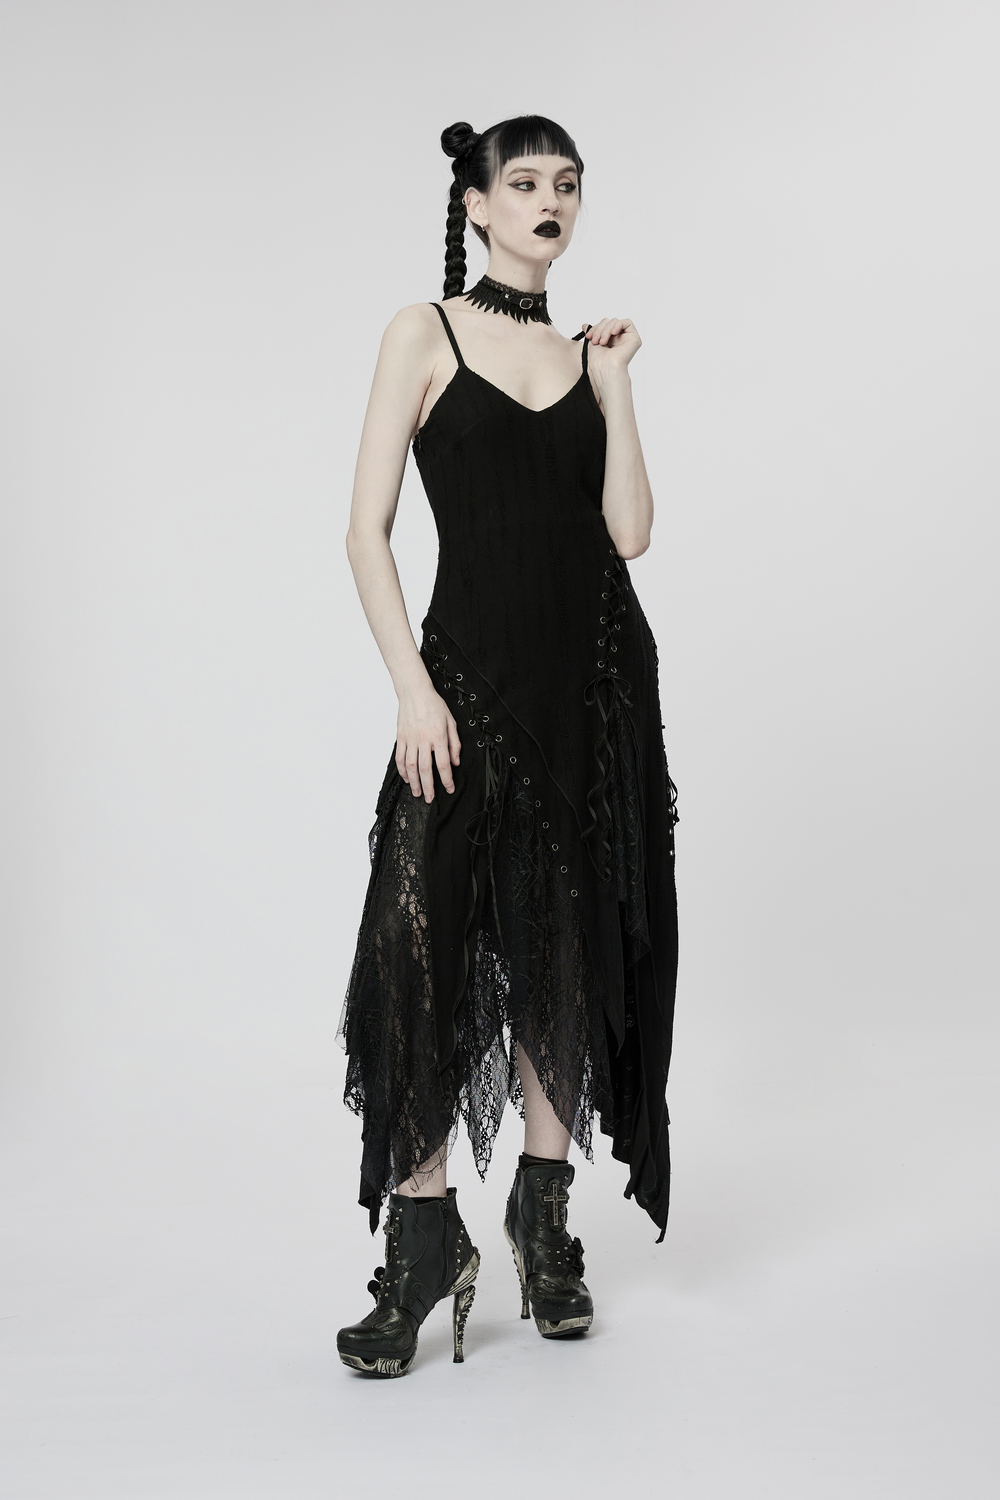 Black Mesh Lace Asymmetrical Pointed Gothic Dress